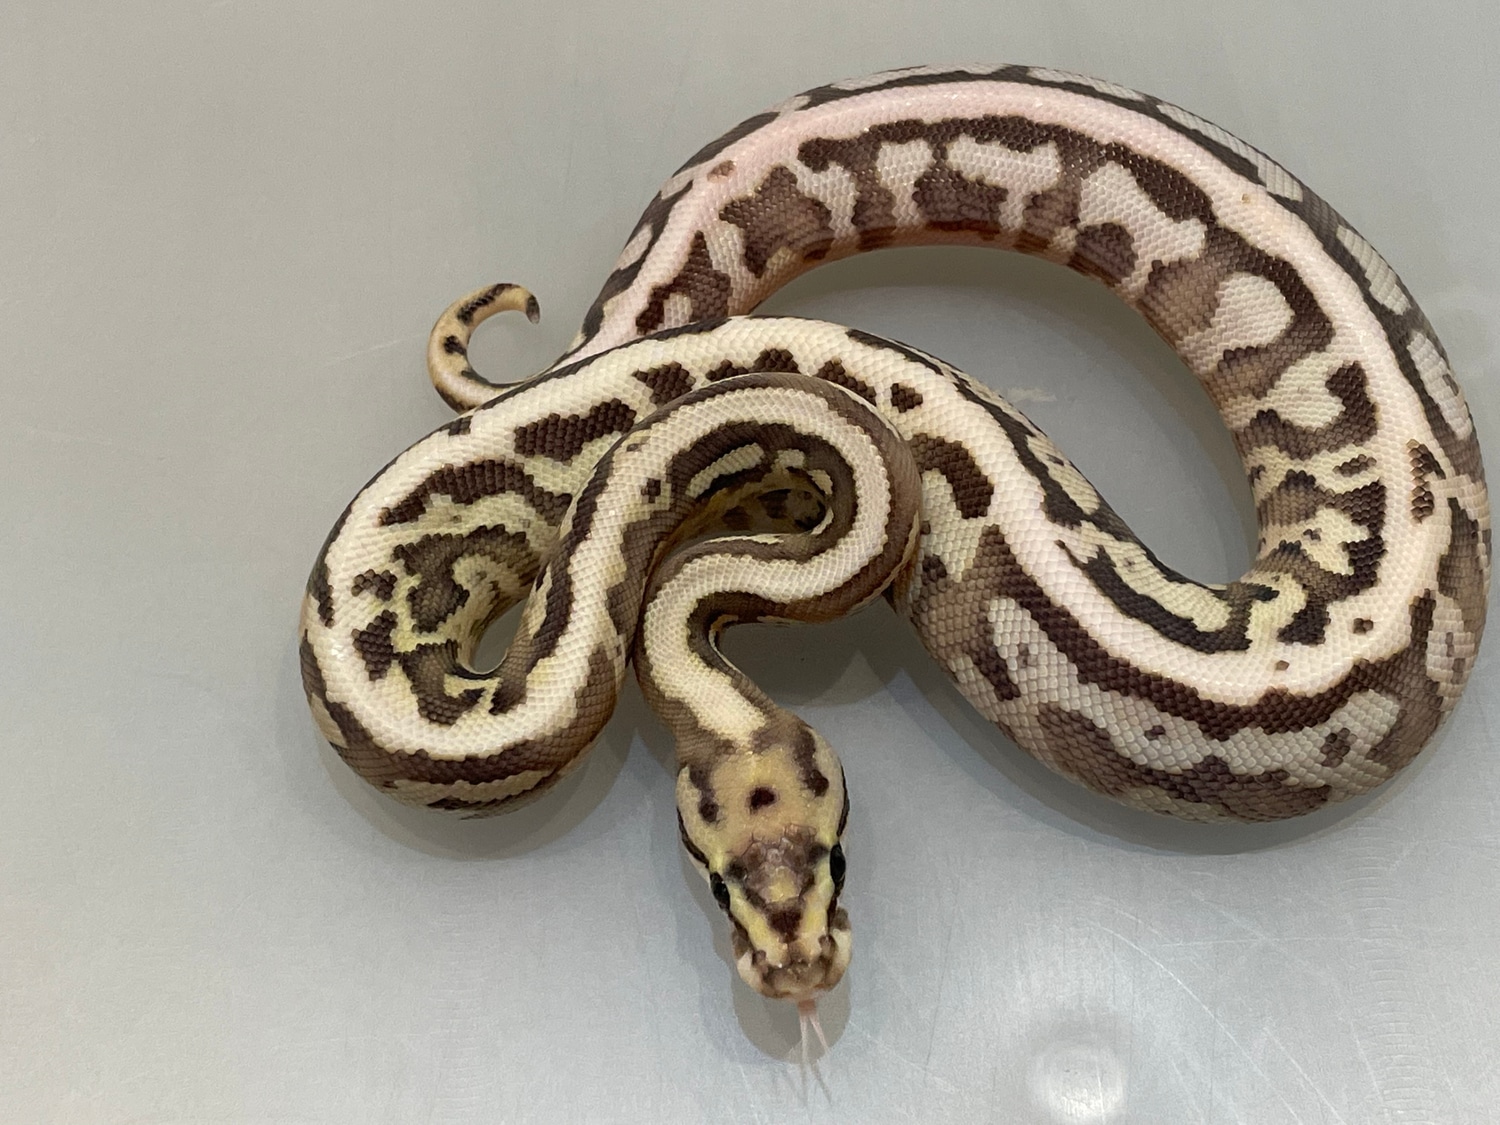 Confusion Butter Special Fire Yellowbelly Ball Python by Brock Wagner Reptiles